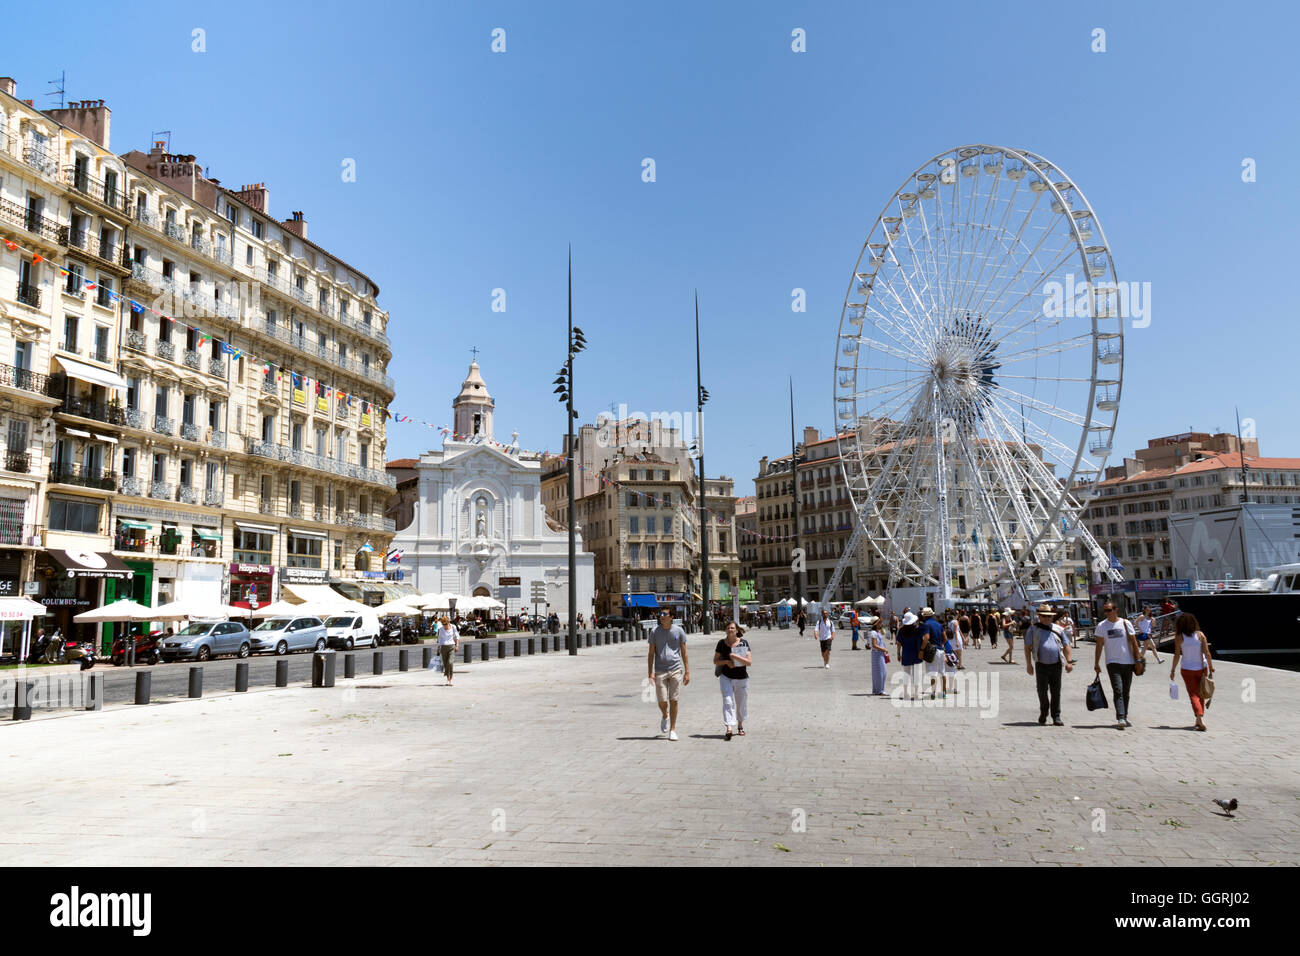 The centre of Marseilles' old port and harbour showing the ferris wheel and Saint-Ferreol Cathedral Stock Photo